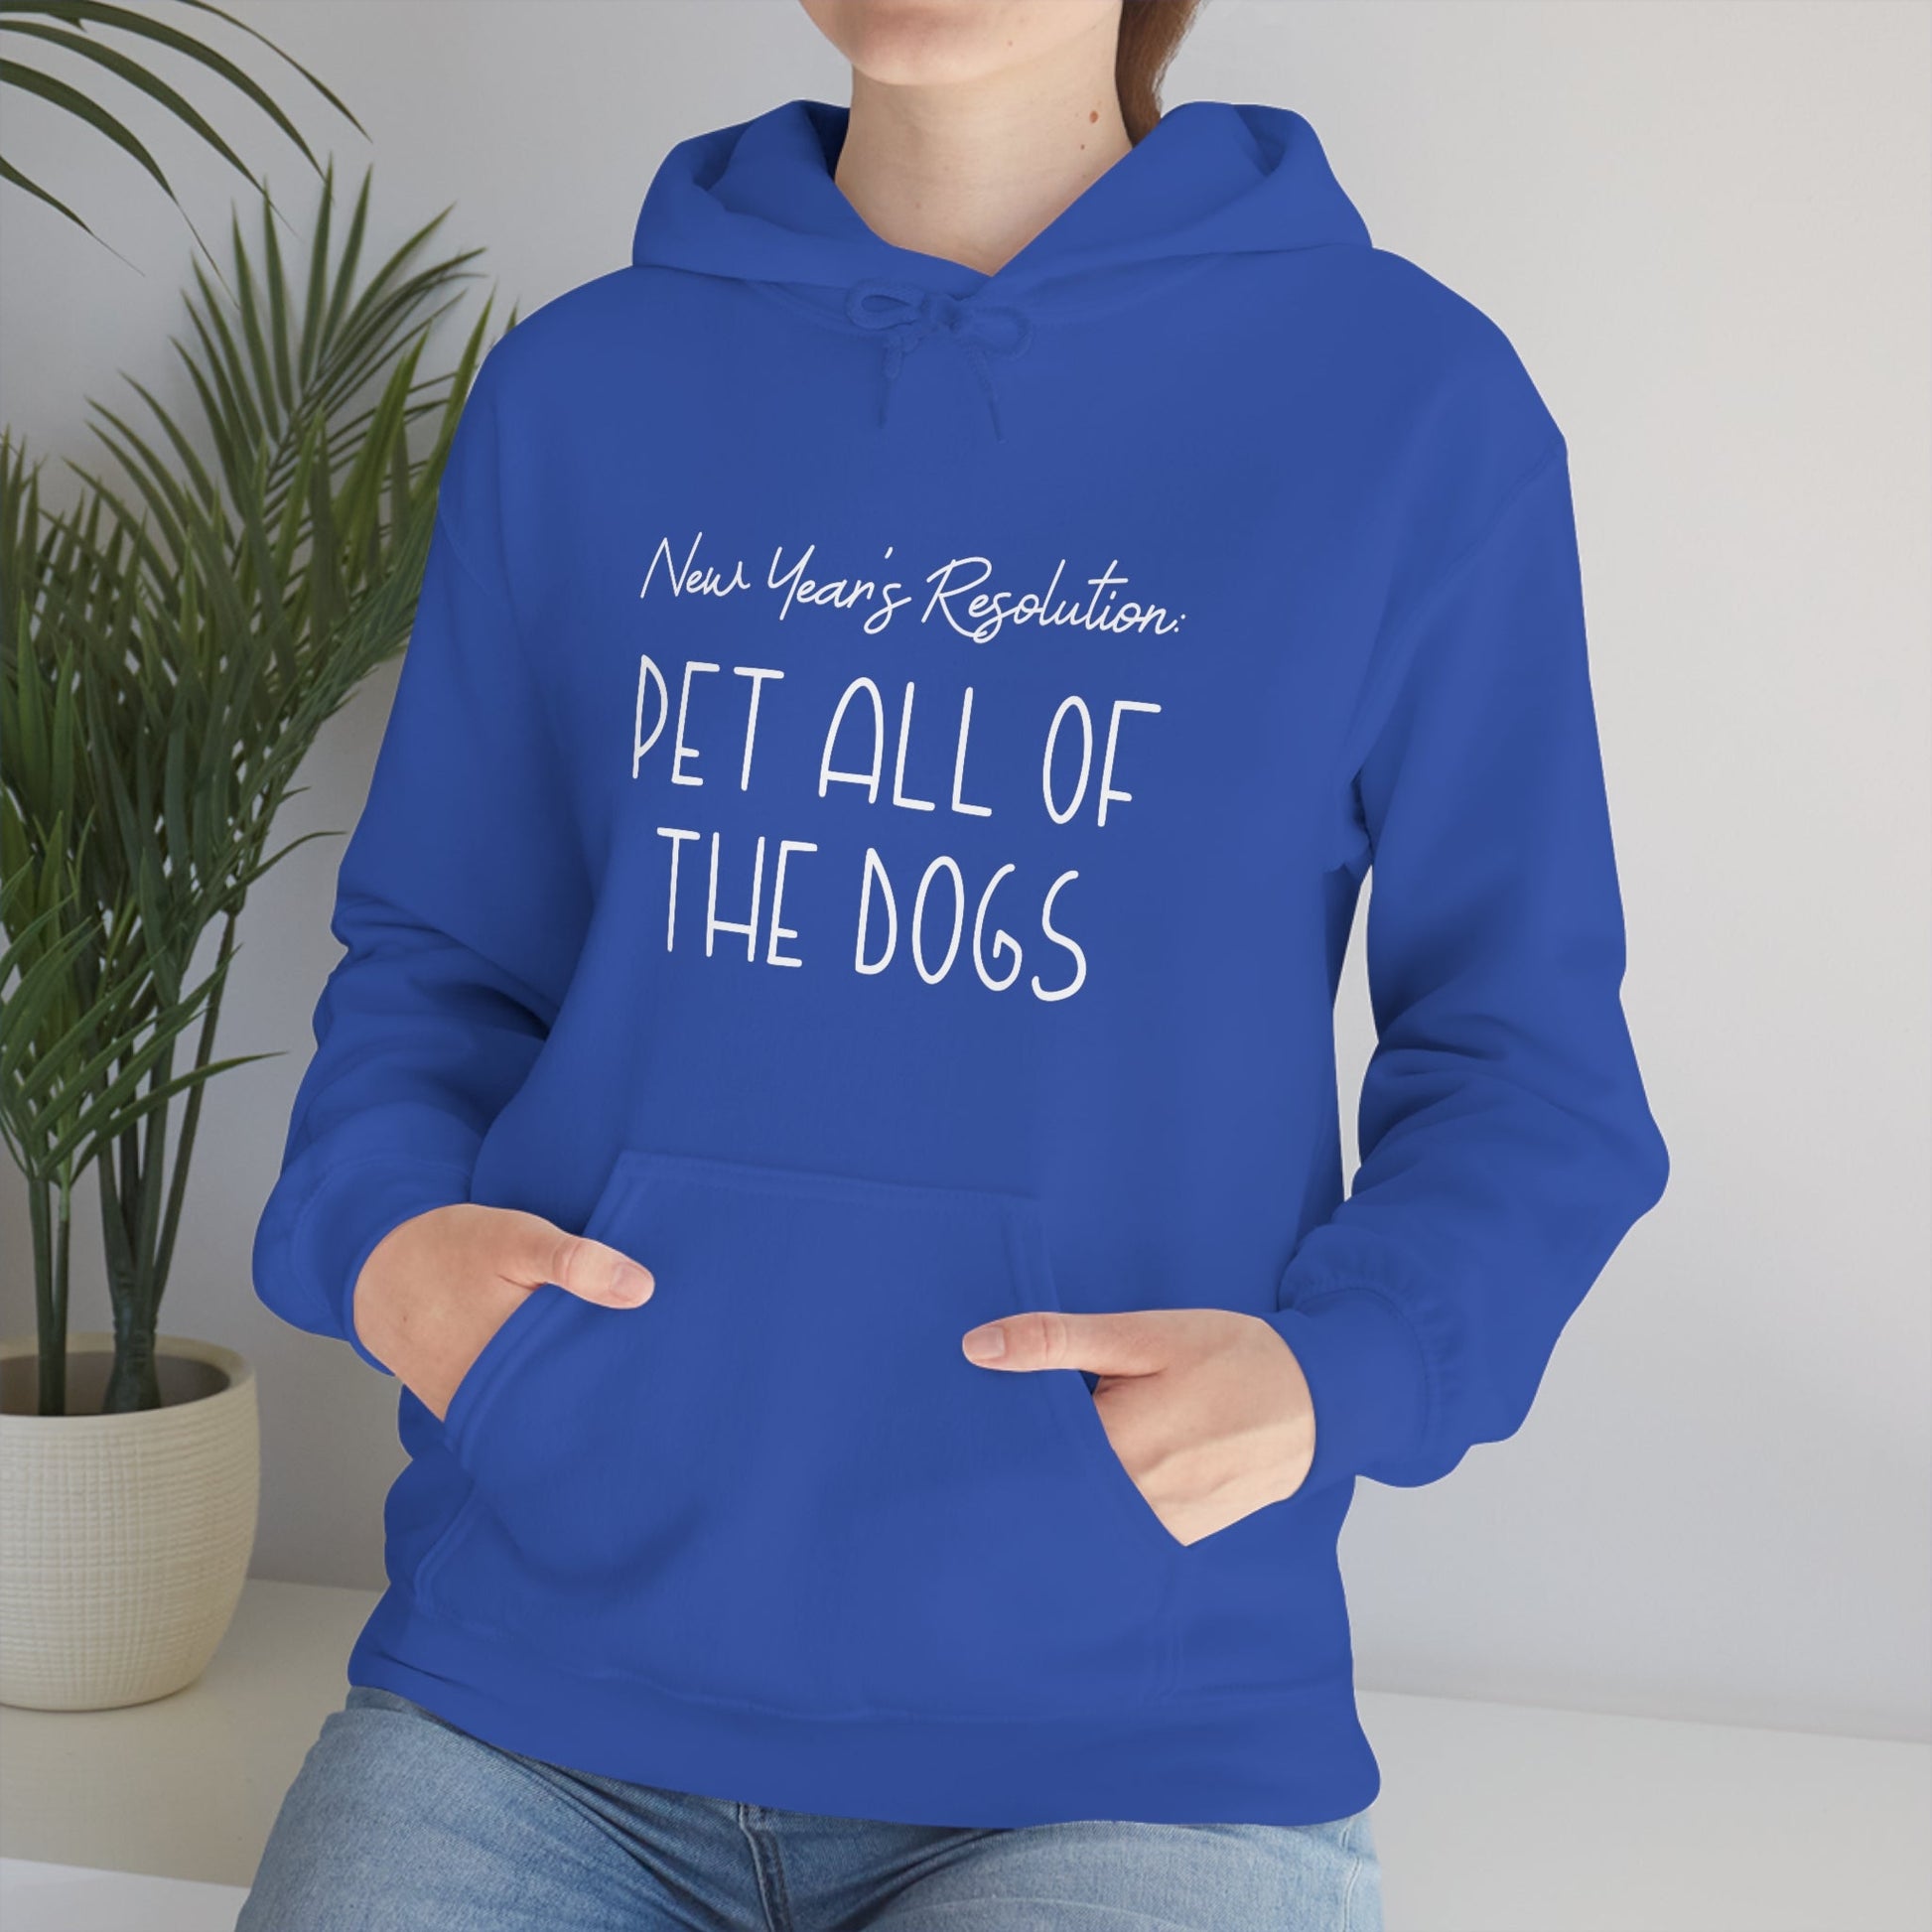 New Year's Resolution: Pet All Of The Dogs | Hooded Sweatshirt - Detezi Designs-37655811974401728326